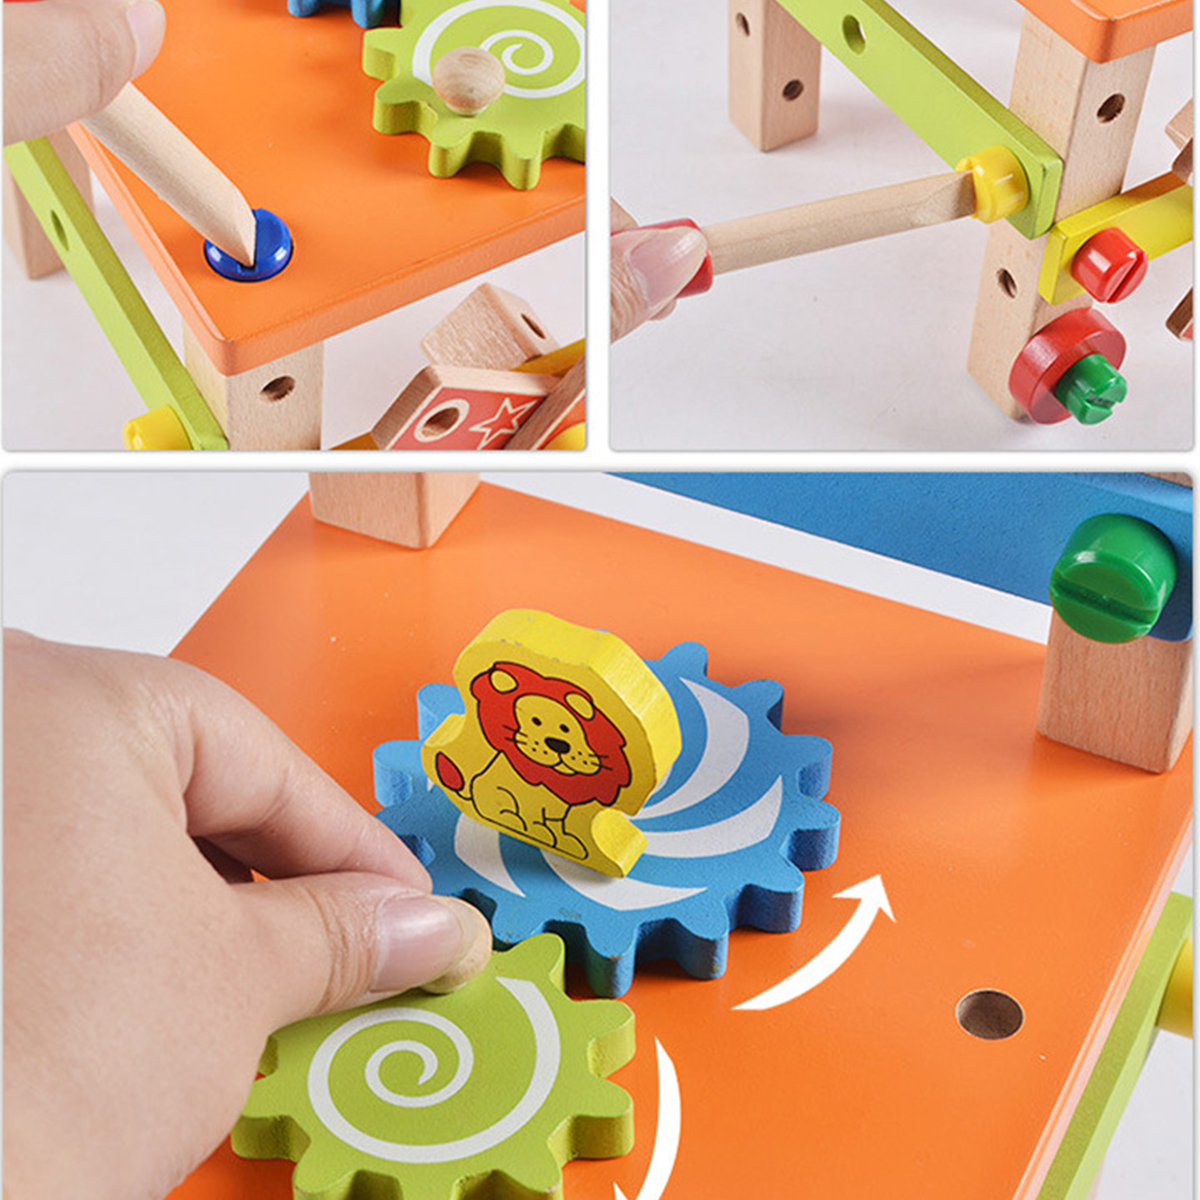 DIY-Creative-Toy-Multi-function-Nut-Disassembly-Combination-Toy-Wooden-Chair-1690769-2